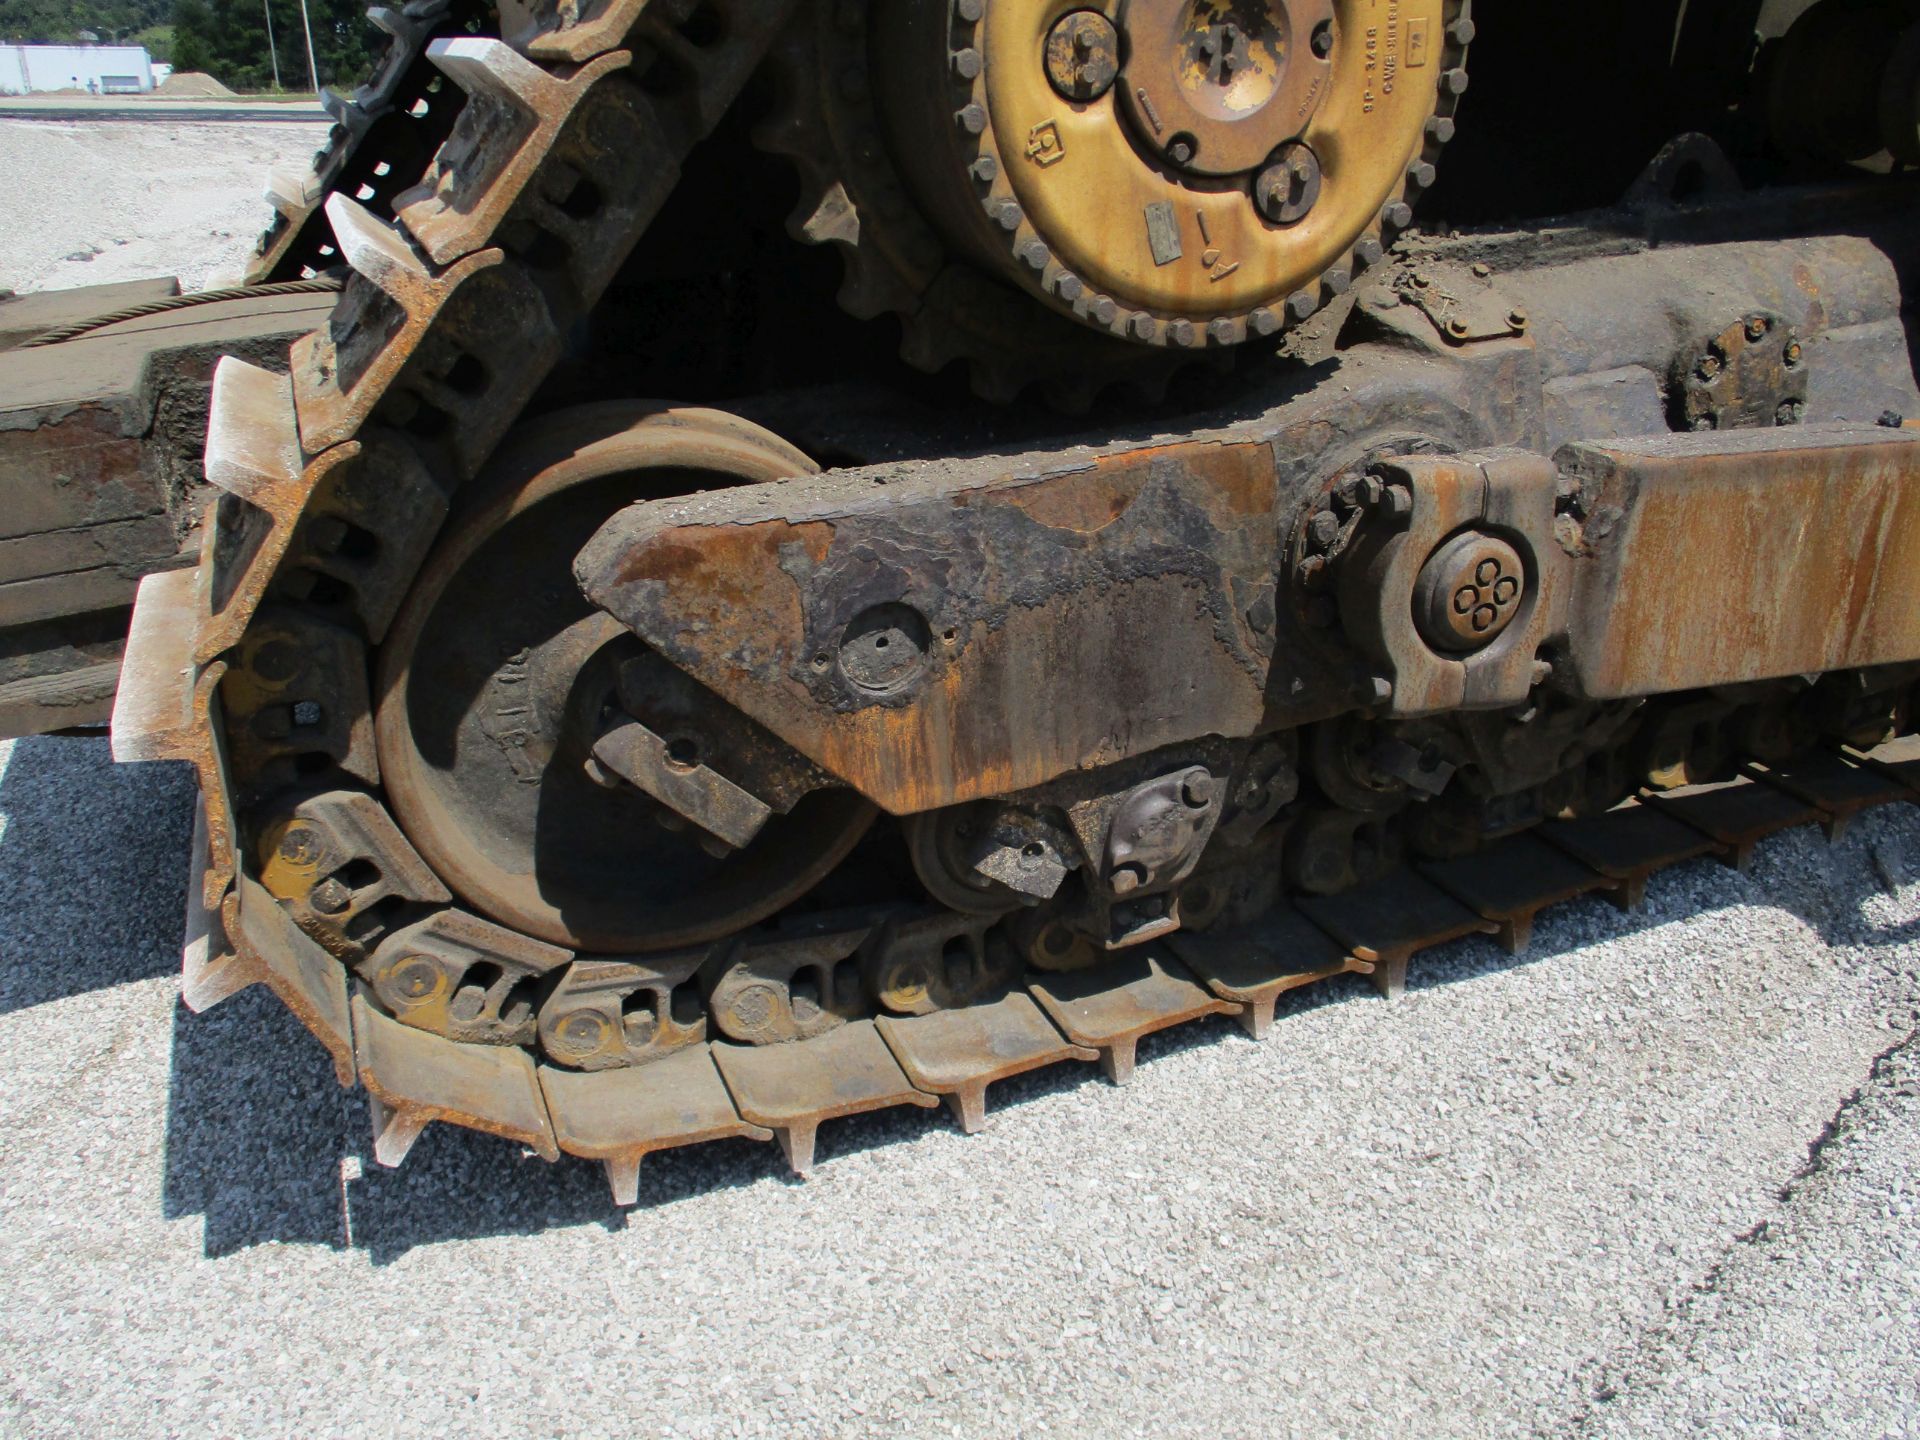 CATERPILLAR MODEL D9R INCLINE TRACK CRAWLER DOZER; S/N D9R-7TL00954, 16,868 HOURS - Image 6 of 11